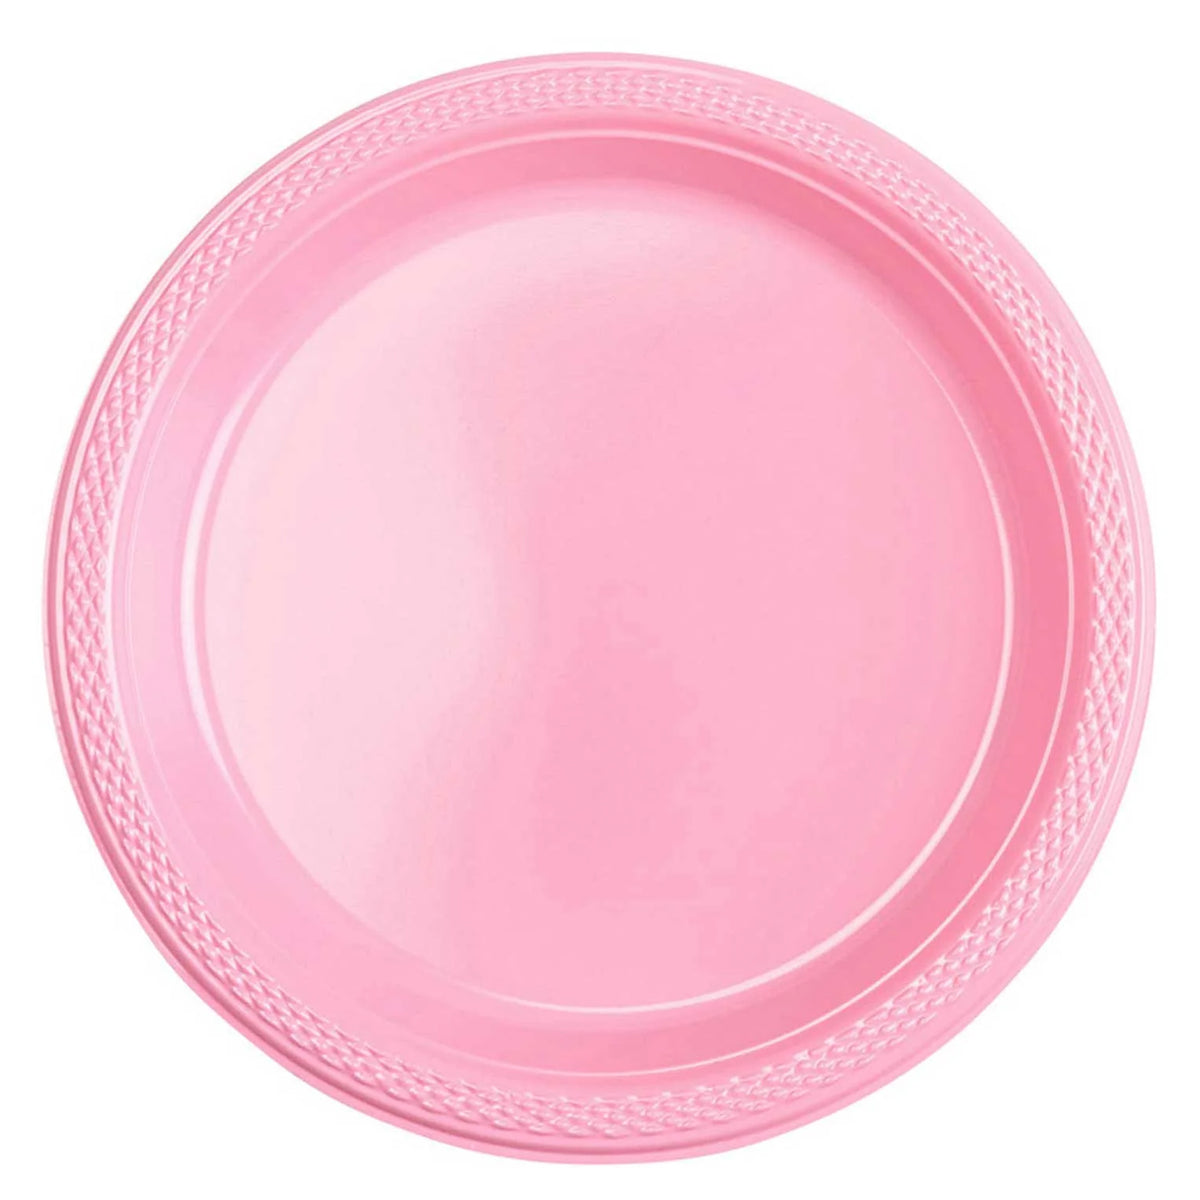 Plate 20 pieces pink 26 cm